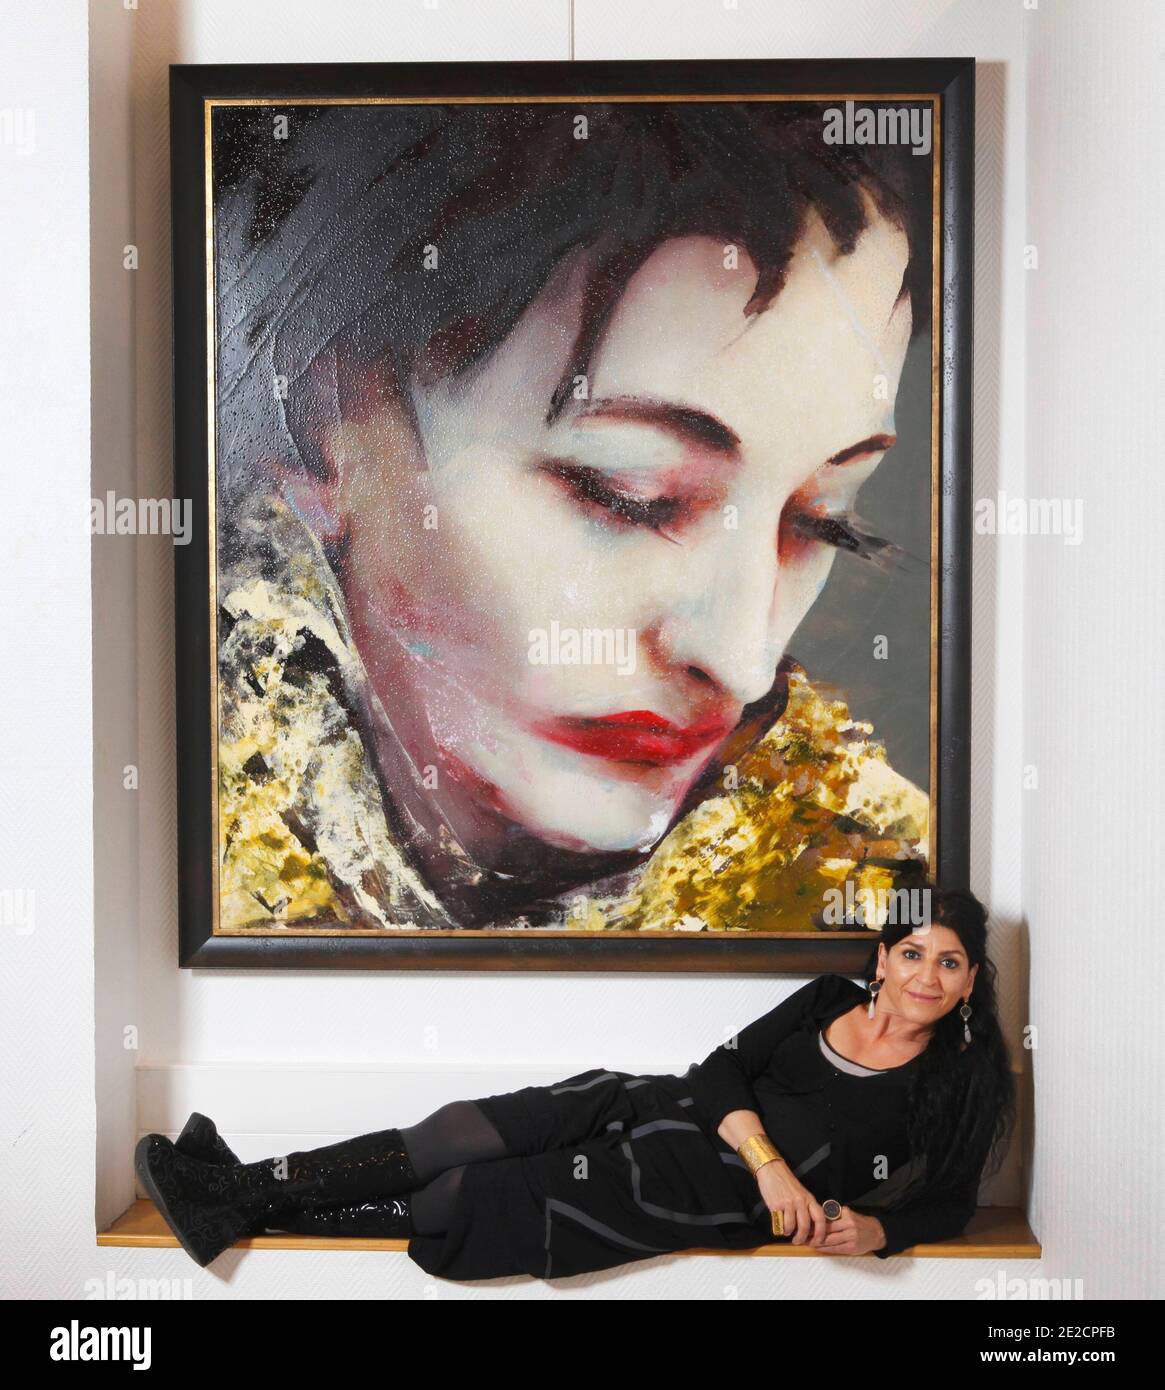 Spanish born painter Lita Cabellut presents 35 paintings of Coco Chanel at  the Opera Gallery (Oct 14-Nov 19) in Paris, France on October 12, 2011.  Lita was born on 1961 in Barcelona,